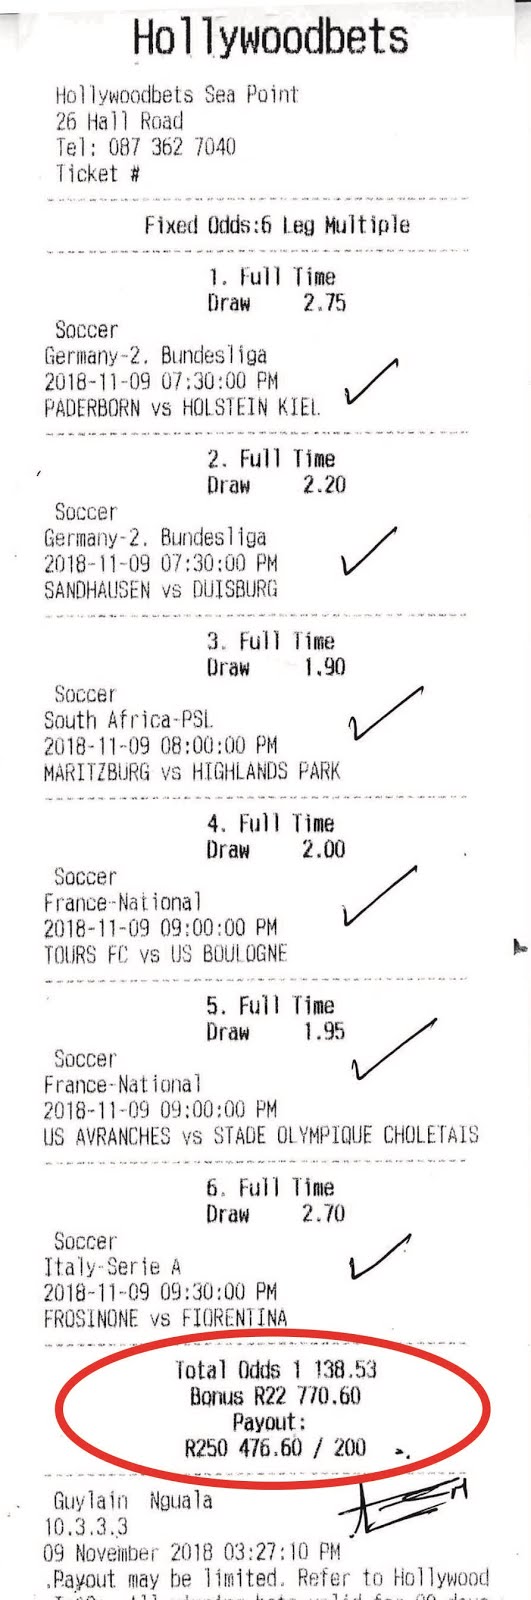 Winning Ticket at Hollywoodbets  - R250476.60 for just R200